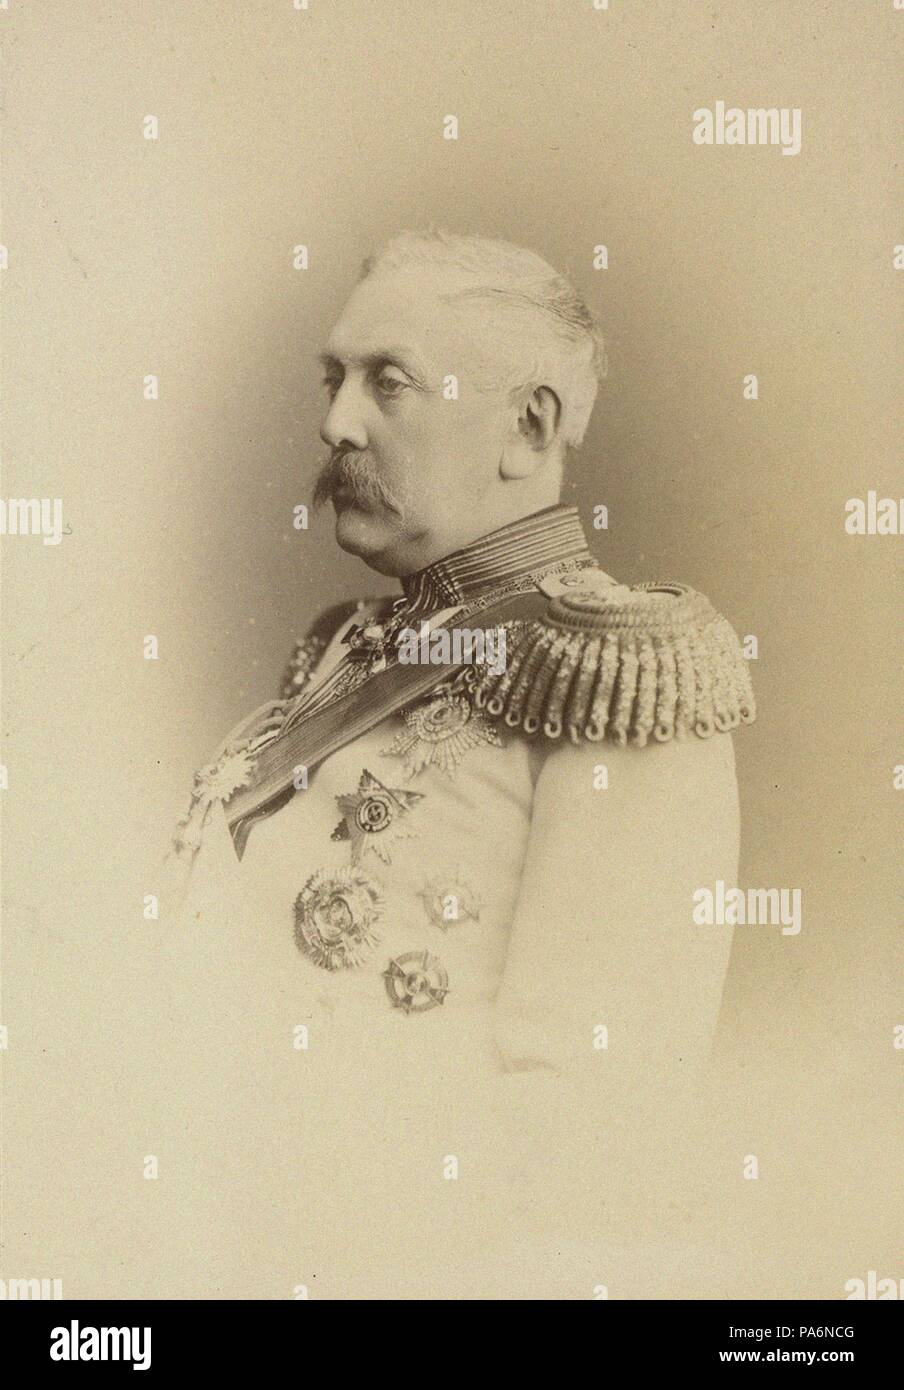 Portrait of Prince Alexander Arkadyevich Suvorov (1804-1882), Count Rymniksky. Museum: Russian State Film and Photo Archive, Krasnogorsk. Stock Photo